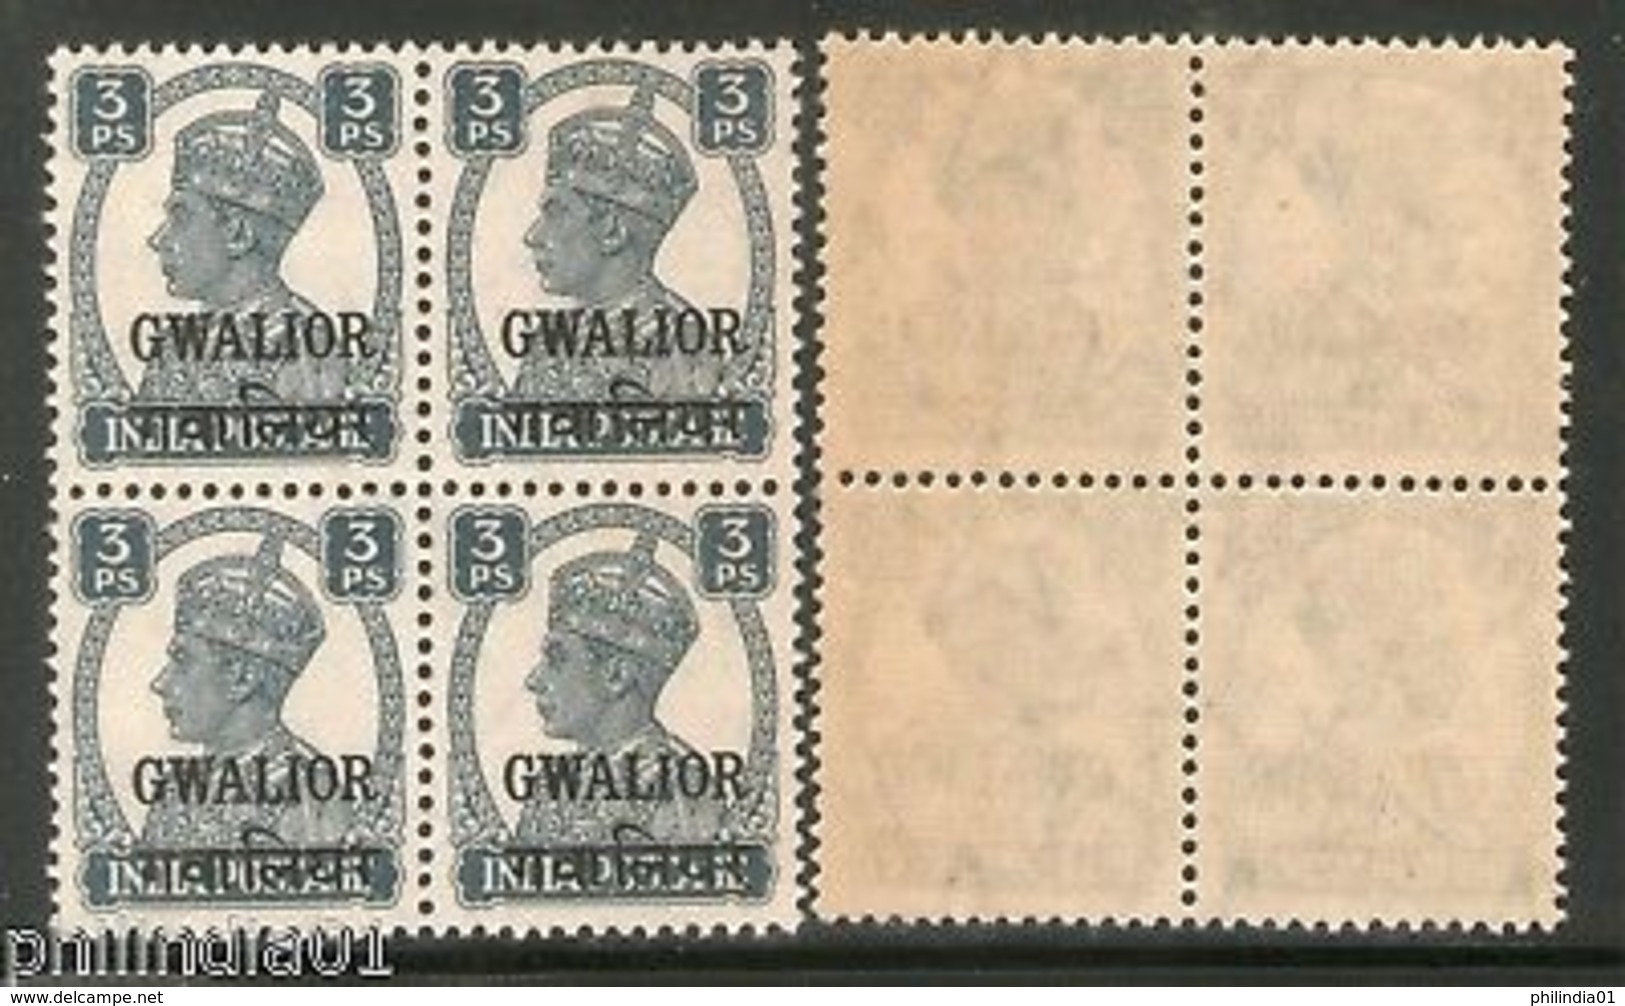 India Gwalior State KG VI 3 Ps Postage Stamp SG 118 / Sc 100 BLK/4 MNH - Gwalior